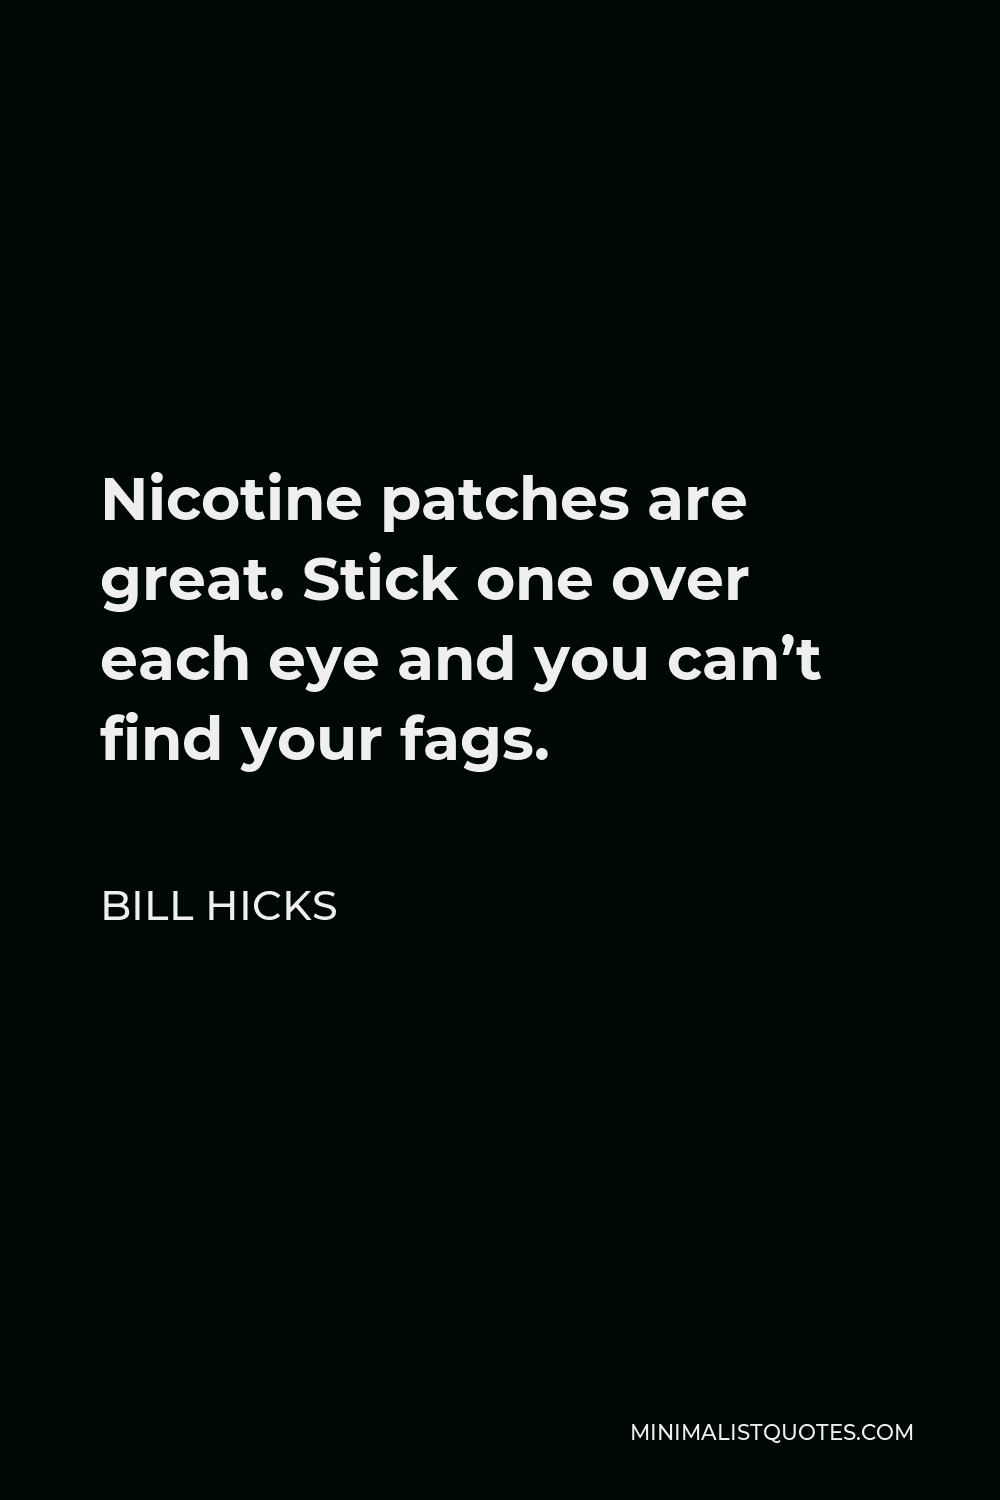 Bill Hicks Quote - Nicotine patches are great. Stick one over each eye and you can’t find your fags.